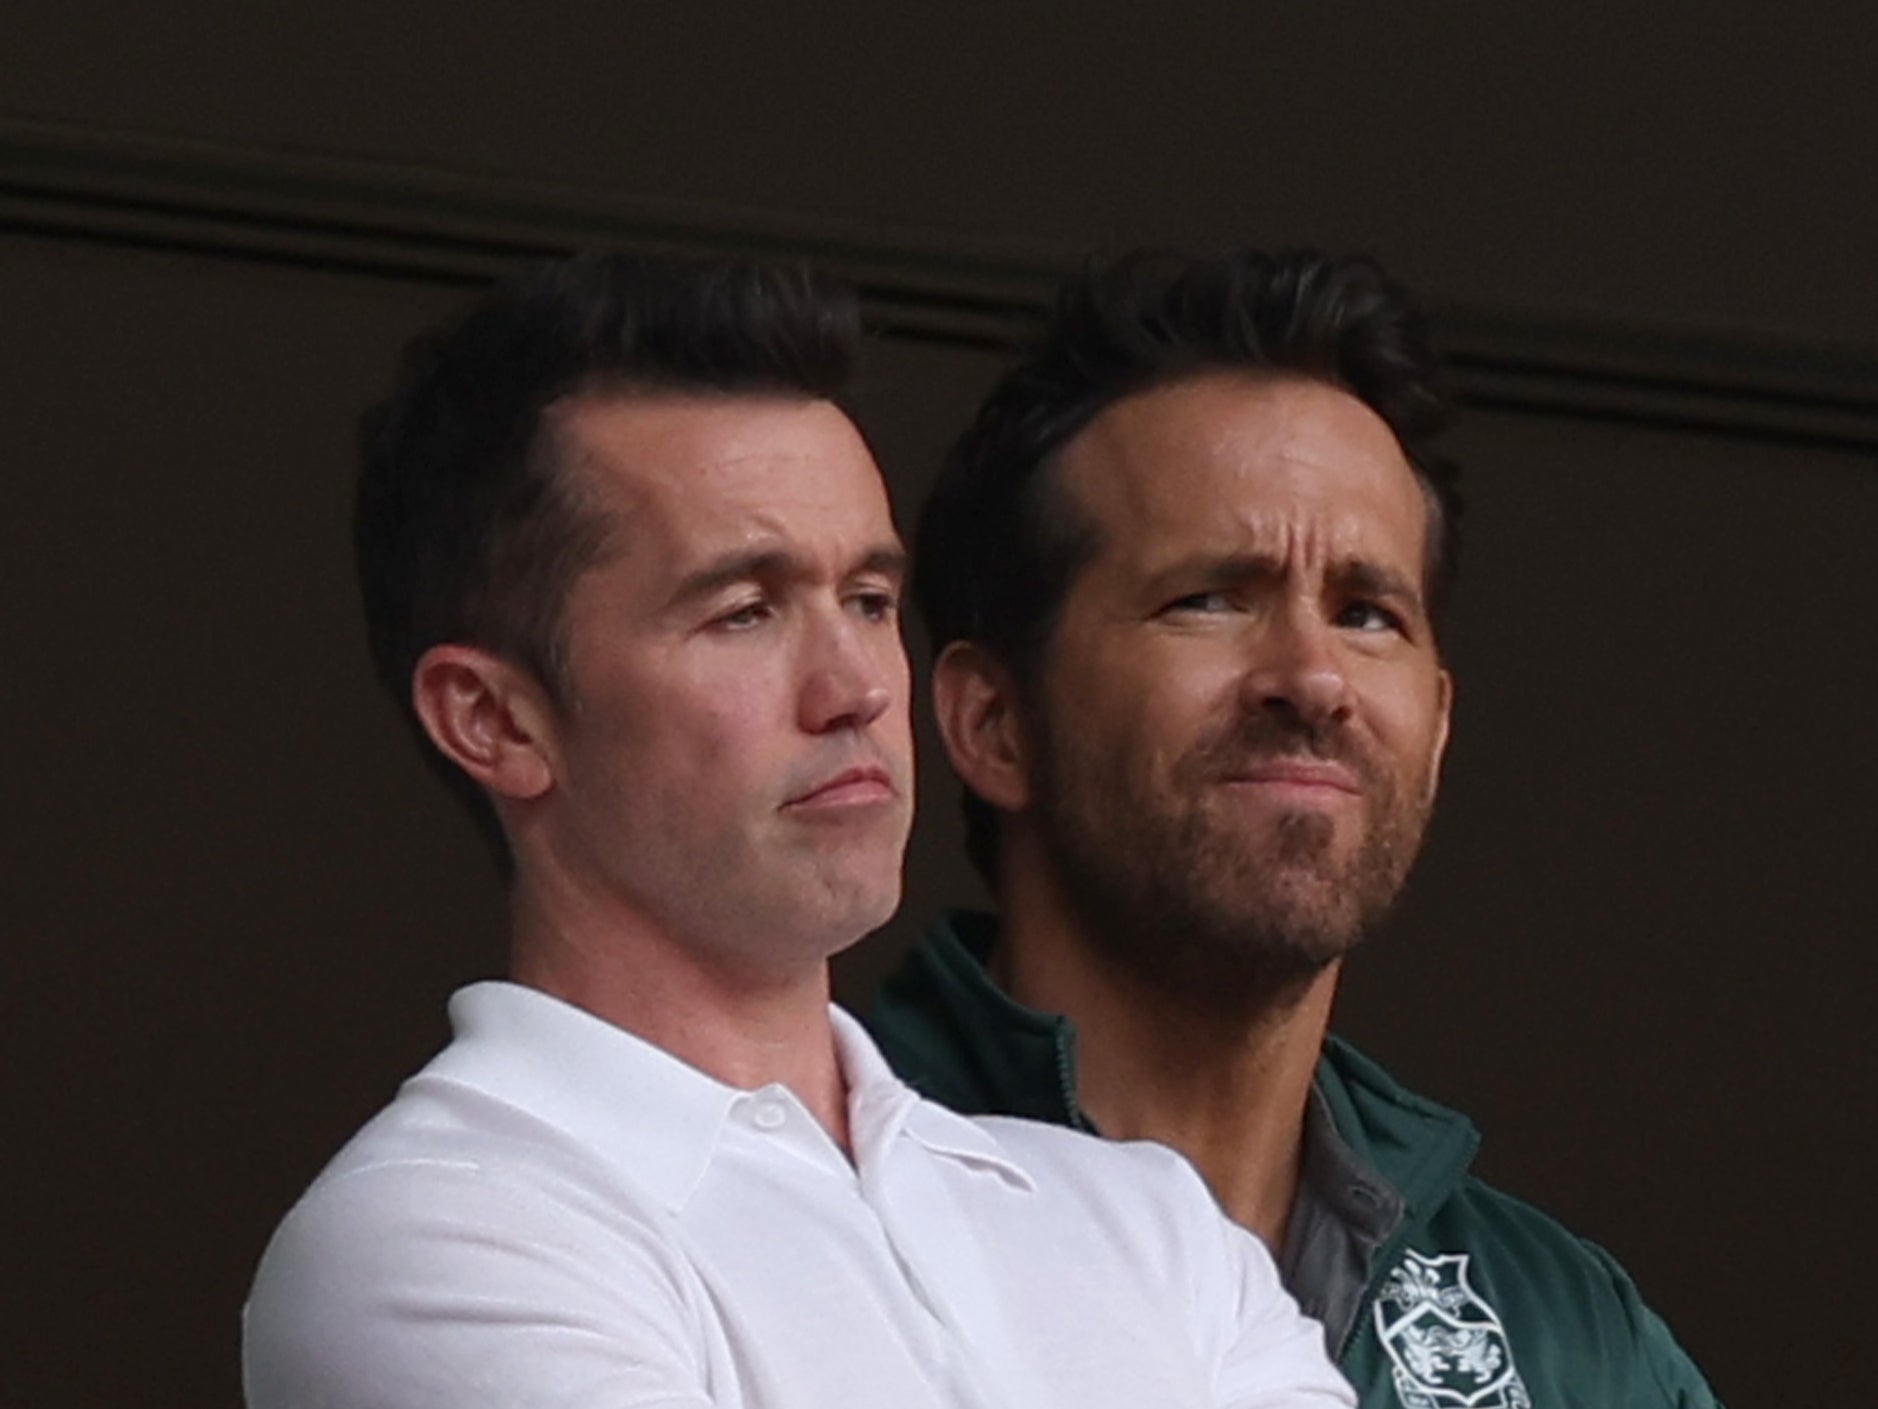 Rob McElhenney and Ryan Reynolds attended a Wrexham FC match